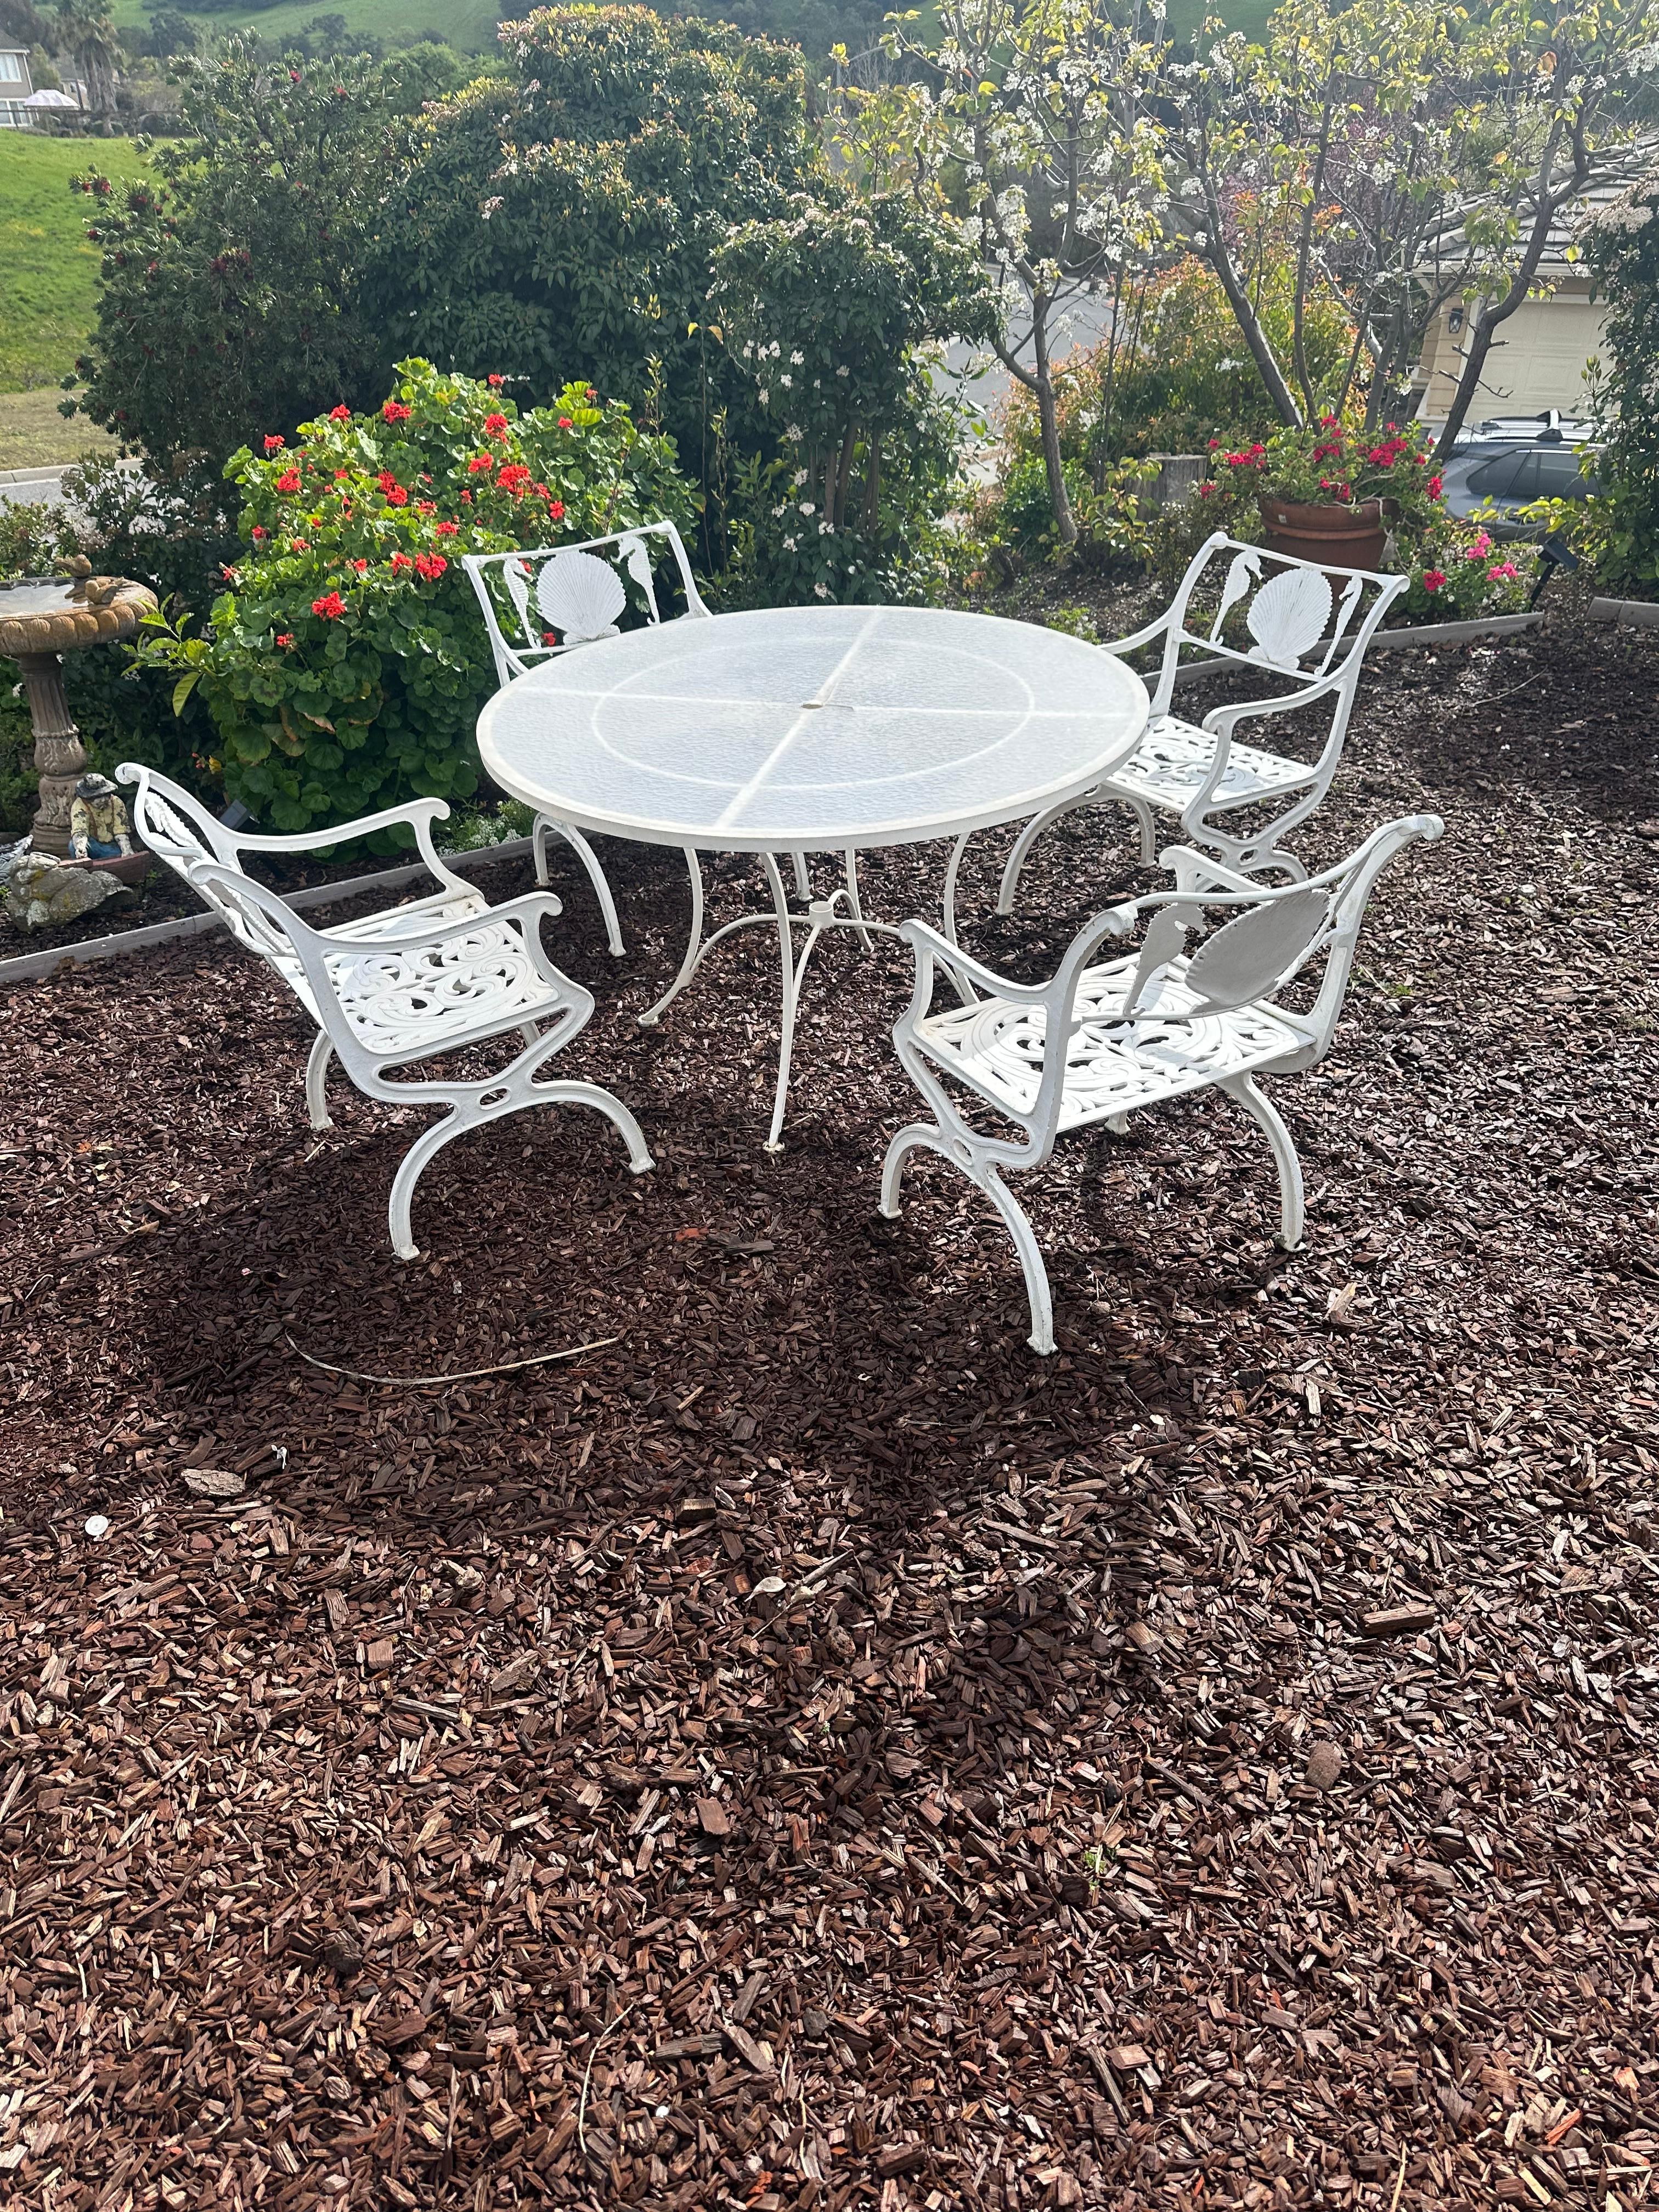 Vintage 1950's Patio Set by Molly of Italy.
5 piece set
Molla's vintage outdoor furniture designs are timeless.
Italian Neoclassical Cast Aluminum chairs with Seahorse and Seashell pattern.
4 Armchairs and round table
**table top is not original and